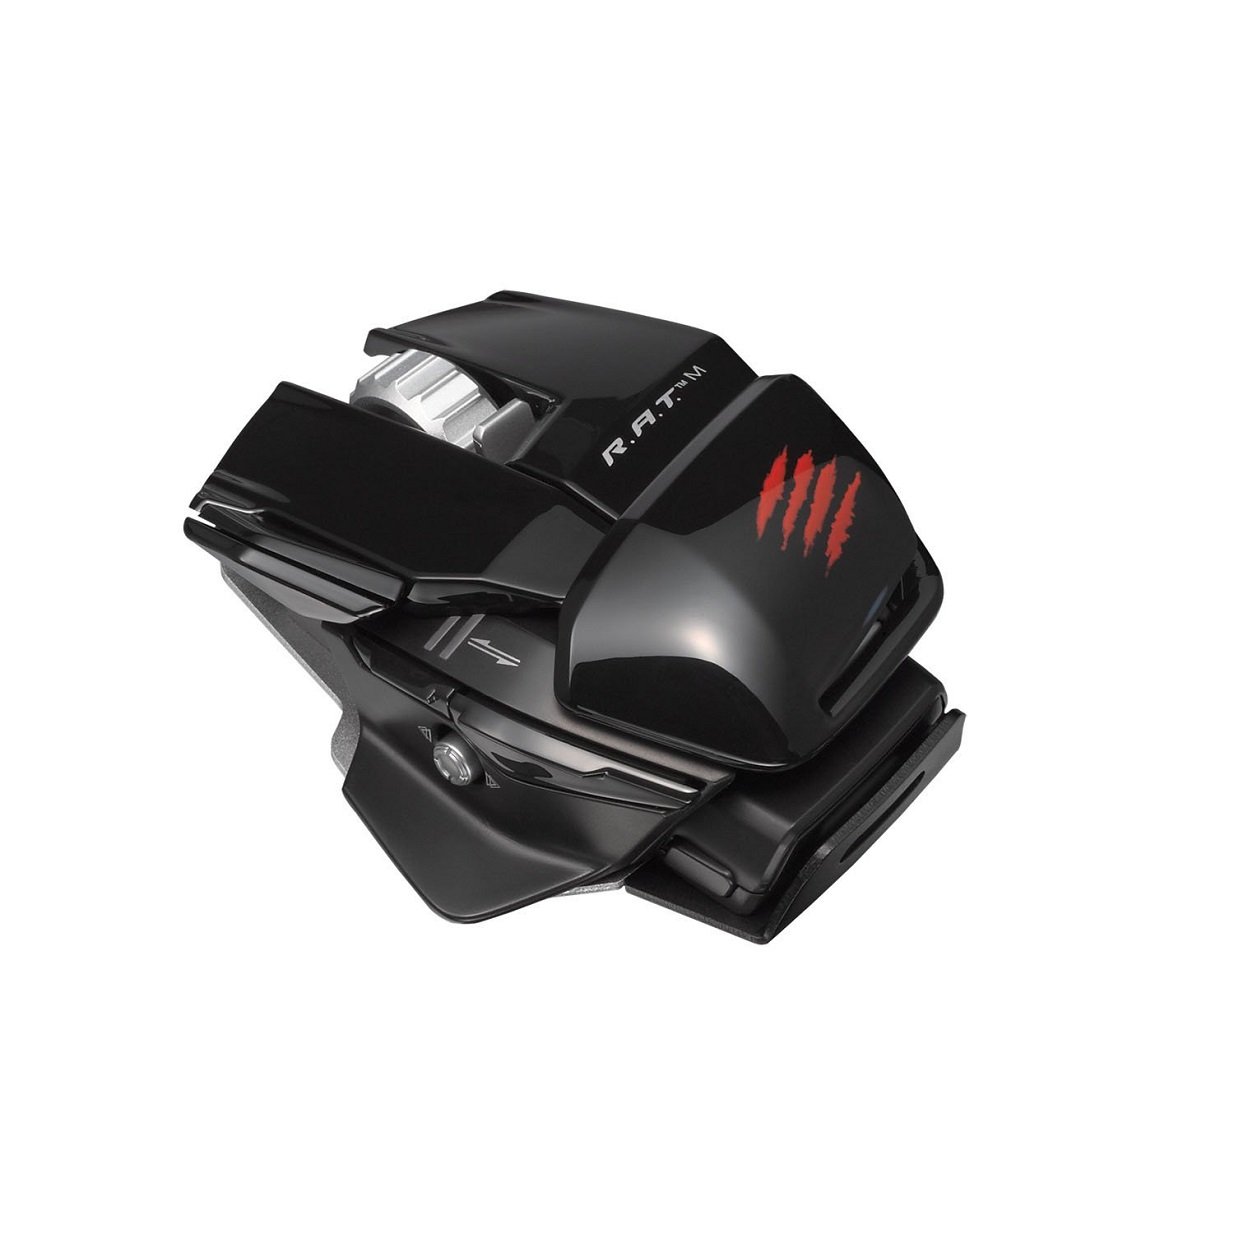 NEW Mad Catz R.A.T M Wireless Mobile Gaming Laser Mouse for PC Mac Gloss Black 